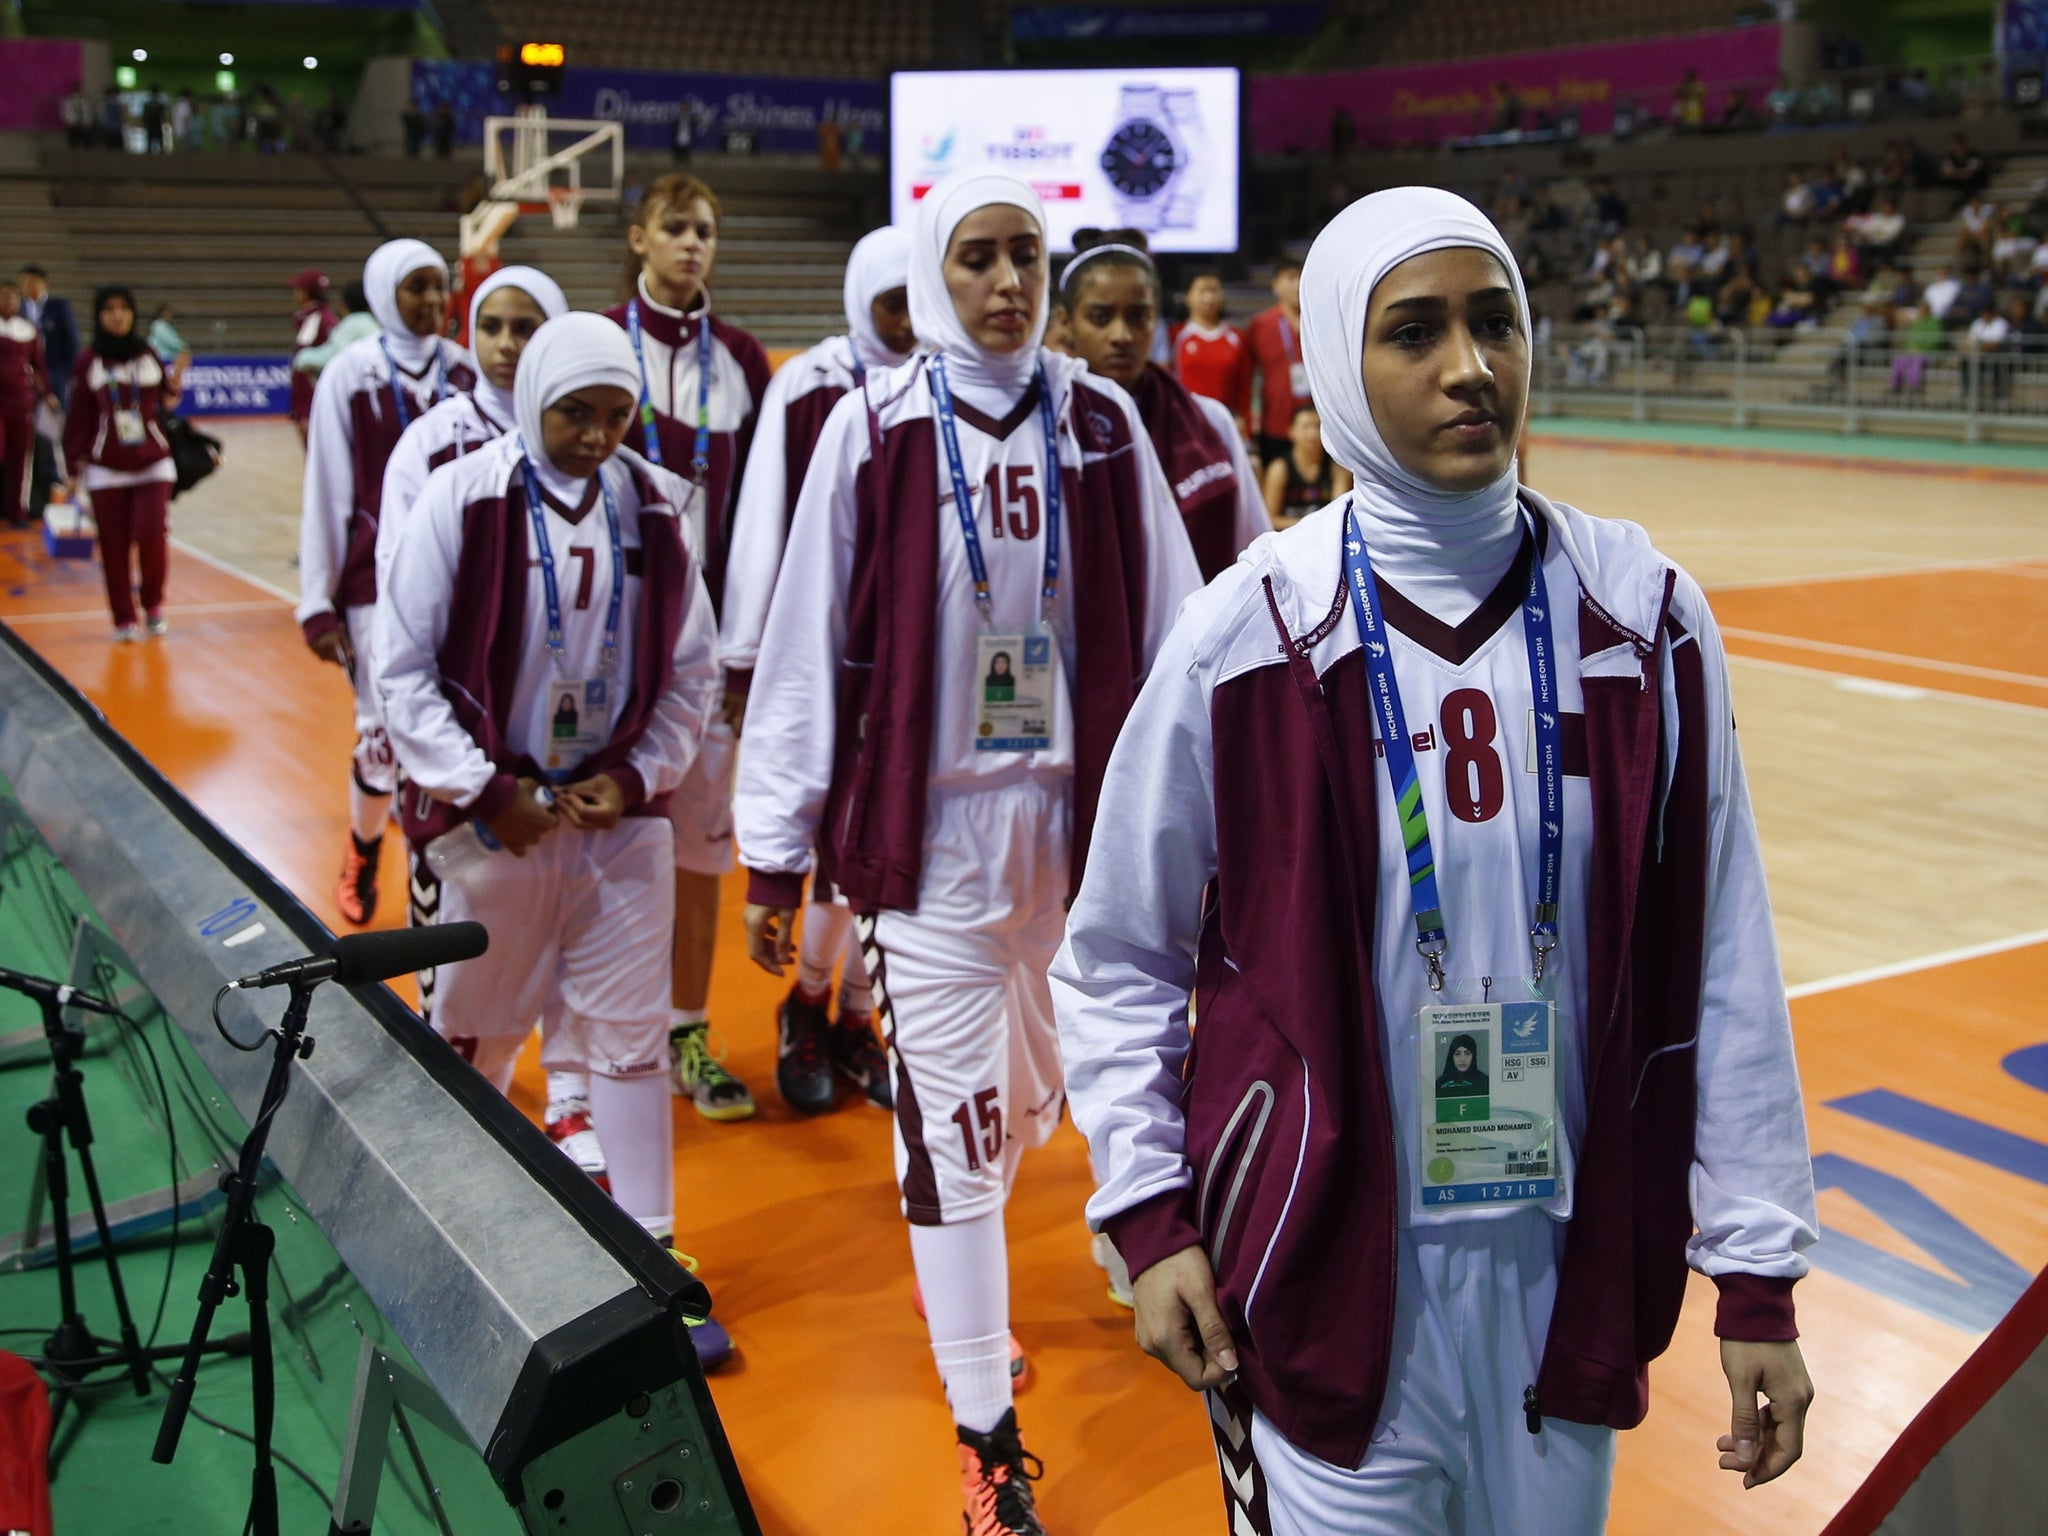 This photo taken on September 24, 2014 shows members of the Qatar women's basketball team walking off the court after withdrawing ahead of their women's preliminary round match against Mongolia during the 17th Asian Games at the Hwaseong Sports Complex Gy